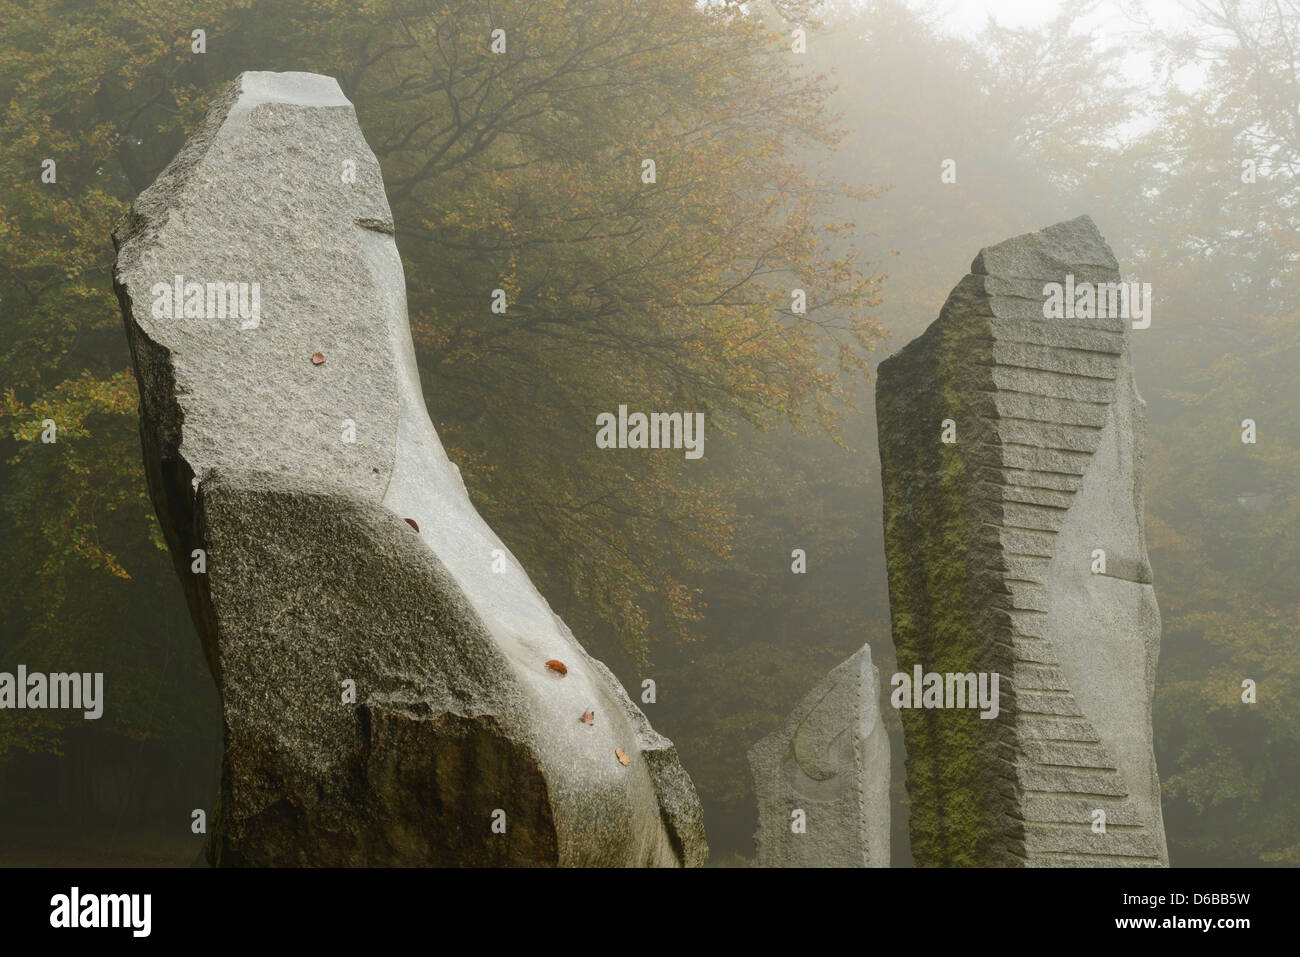 Standing stones at Heaven's Gate in the Longleat Estate, Wiltshire, UK. The stones were carved by artist Paul Norris. Stock Photo